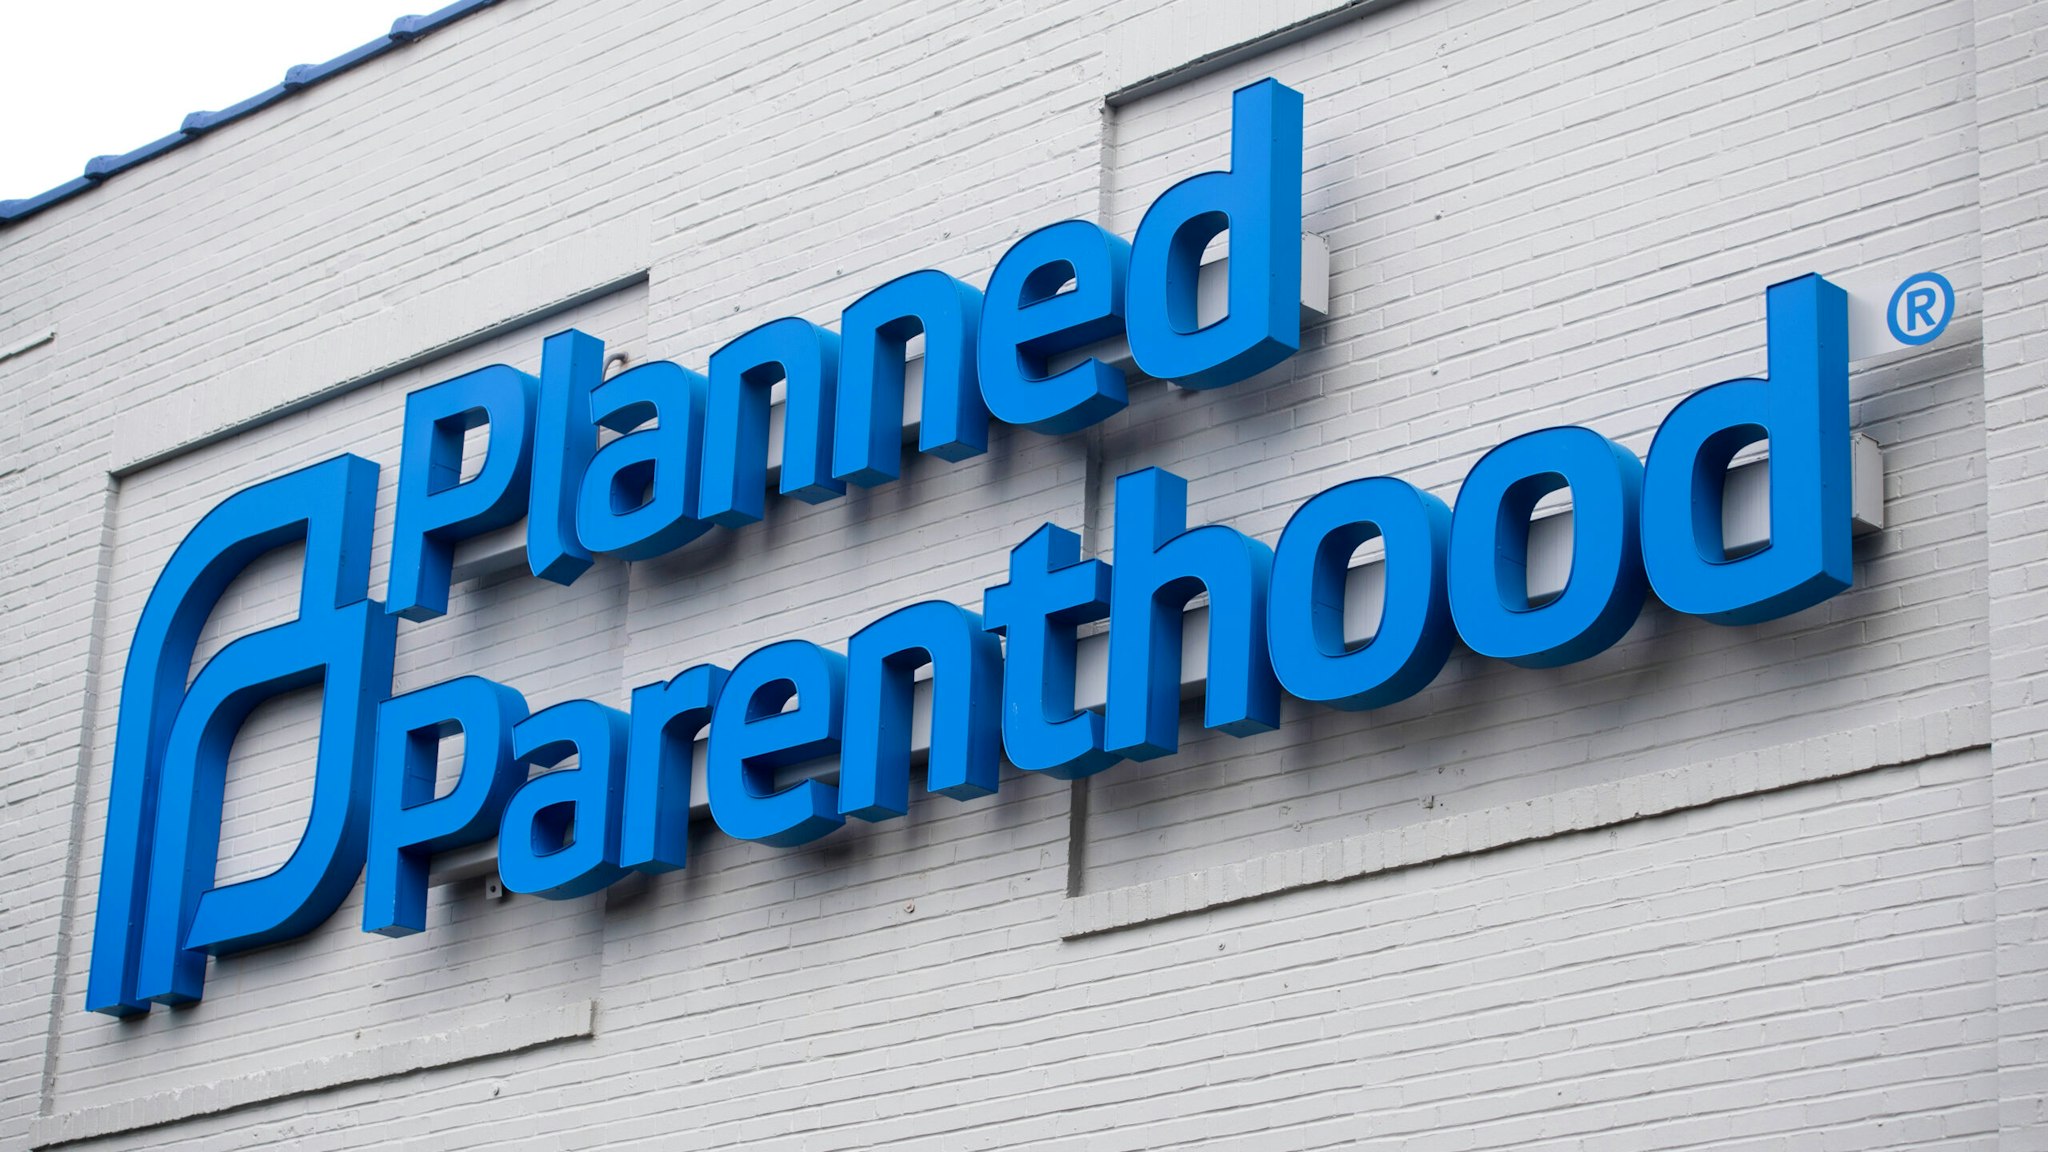 The logo of Planned Parenthood is seen outside the Planned Parenthood Reproductive Health Services Center in St. Louis, Missouri, May 30, 2019, the last location in the state performing abortions. - A US court weighed the fate of the last abortion clinic in Missouri on May 30, with the state hours away from becoming the first in 45 years to no longer offer the procedure amid a nationwide push to curtail access to abortion.